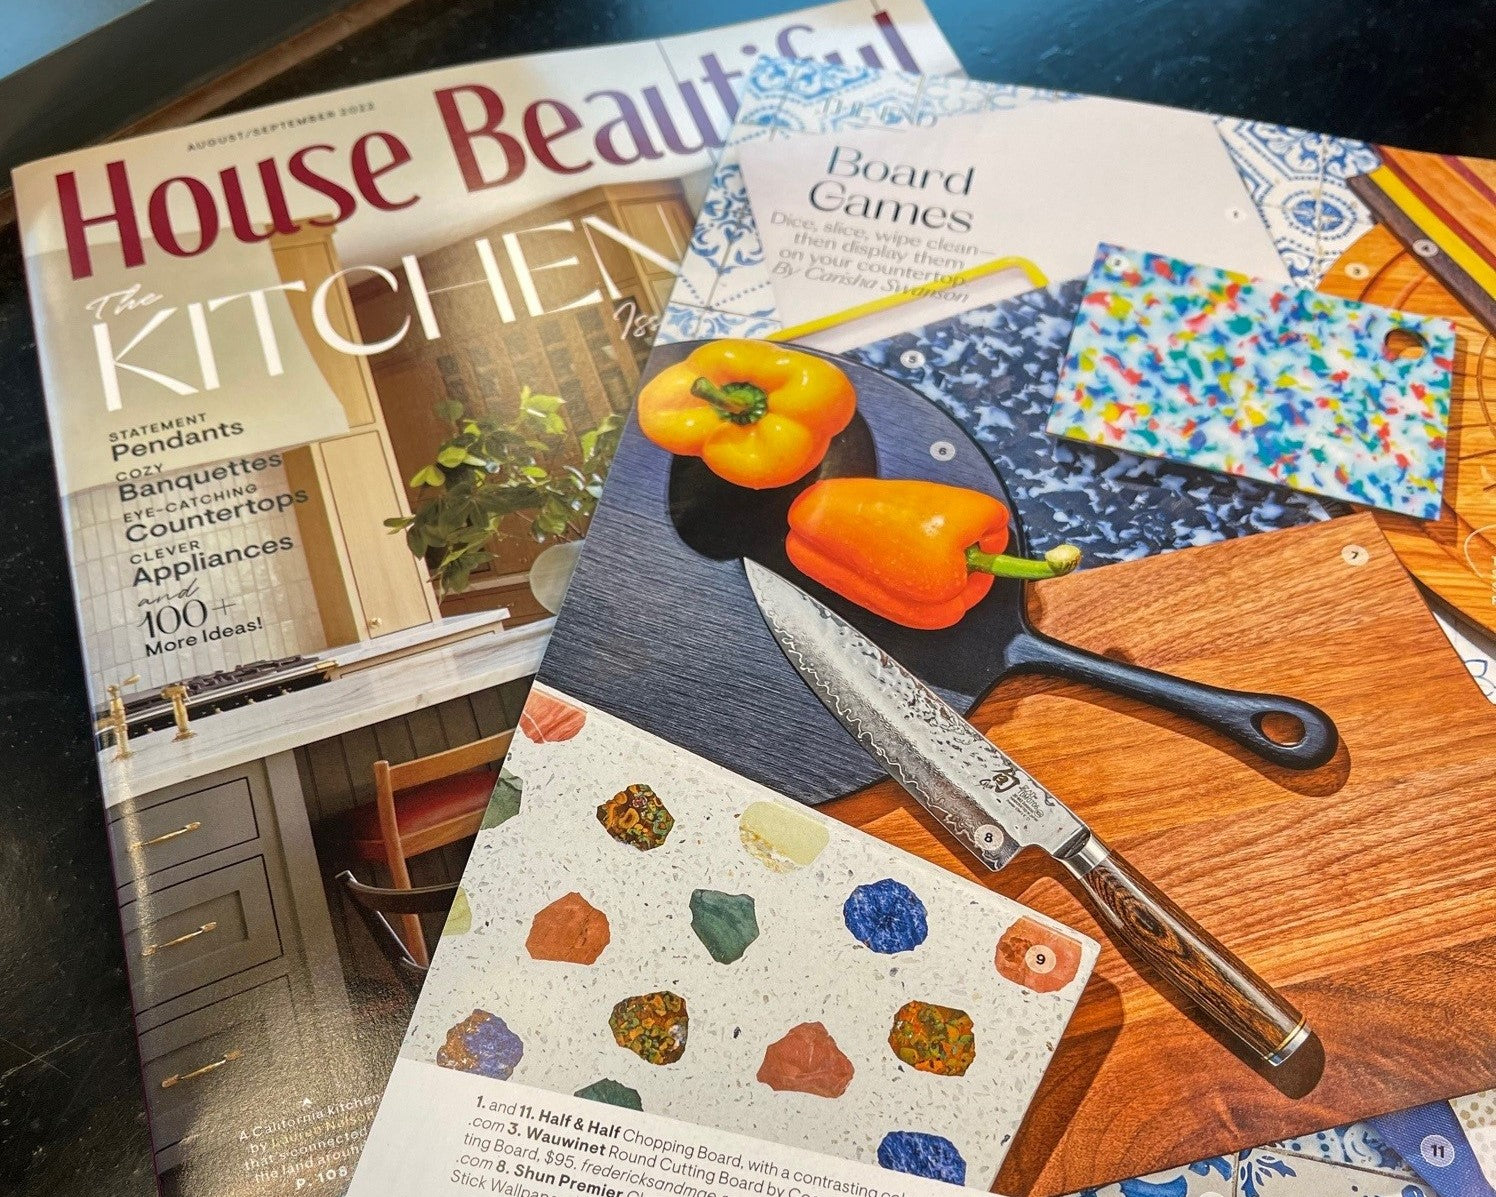 As seen in House Beautiful Magazine